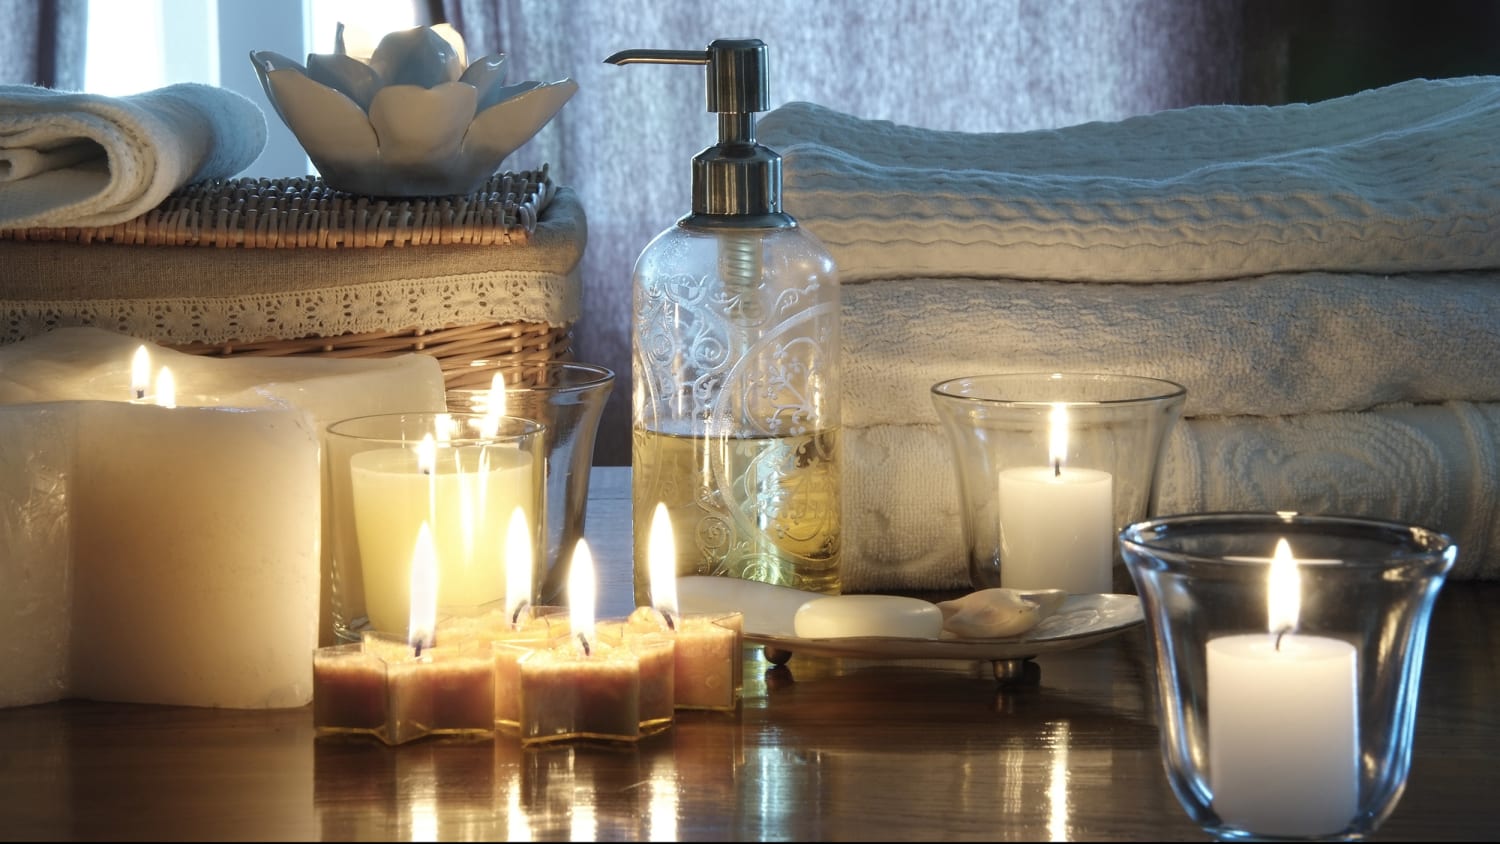 Candle safety tips: Burning candles at home